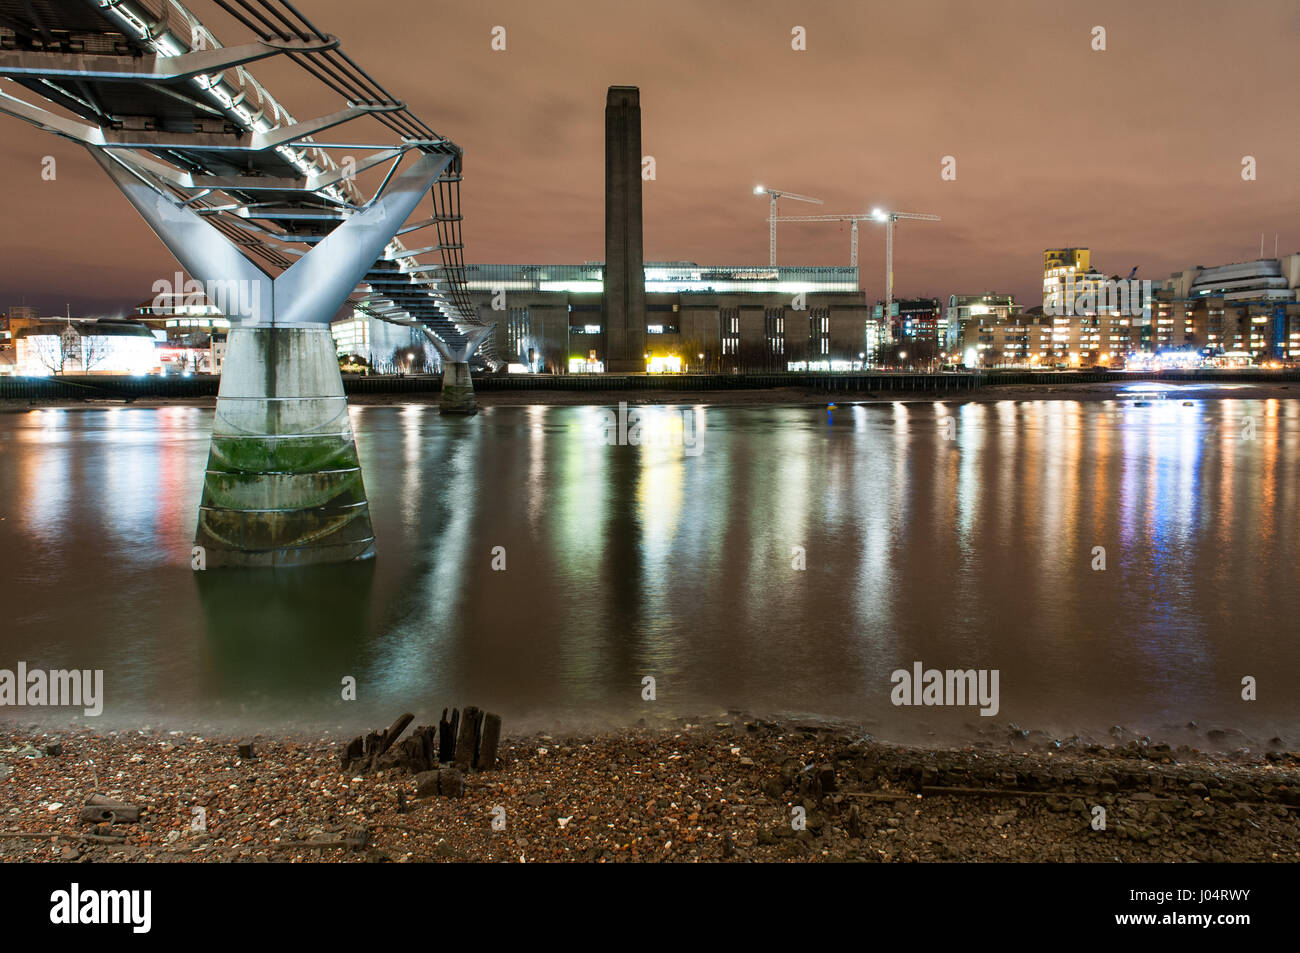 London, England - December 2, 2010: The Millennium Bridge and Tate Modern seen from the banks of the River Thames at night. Stock Photo